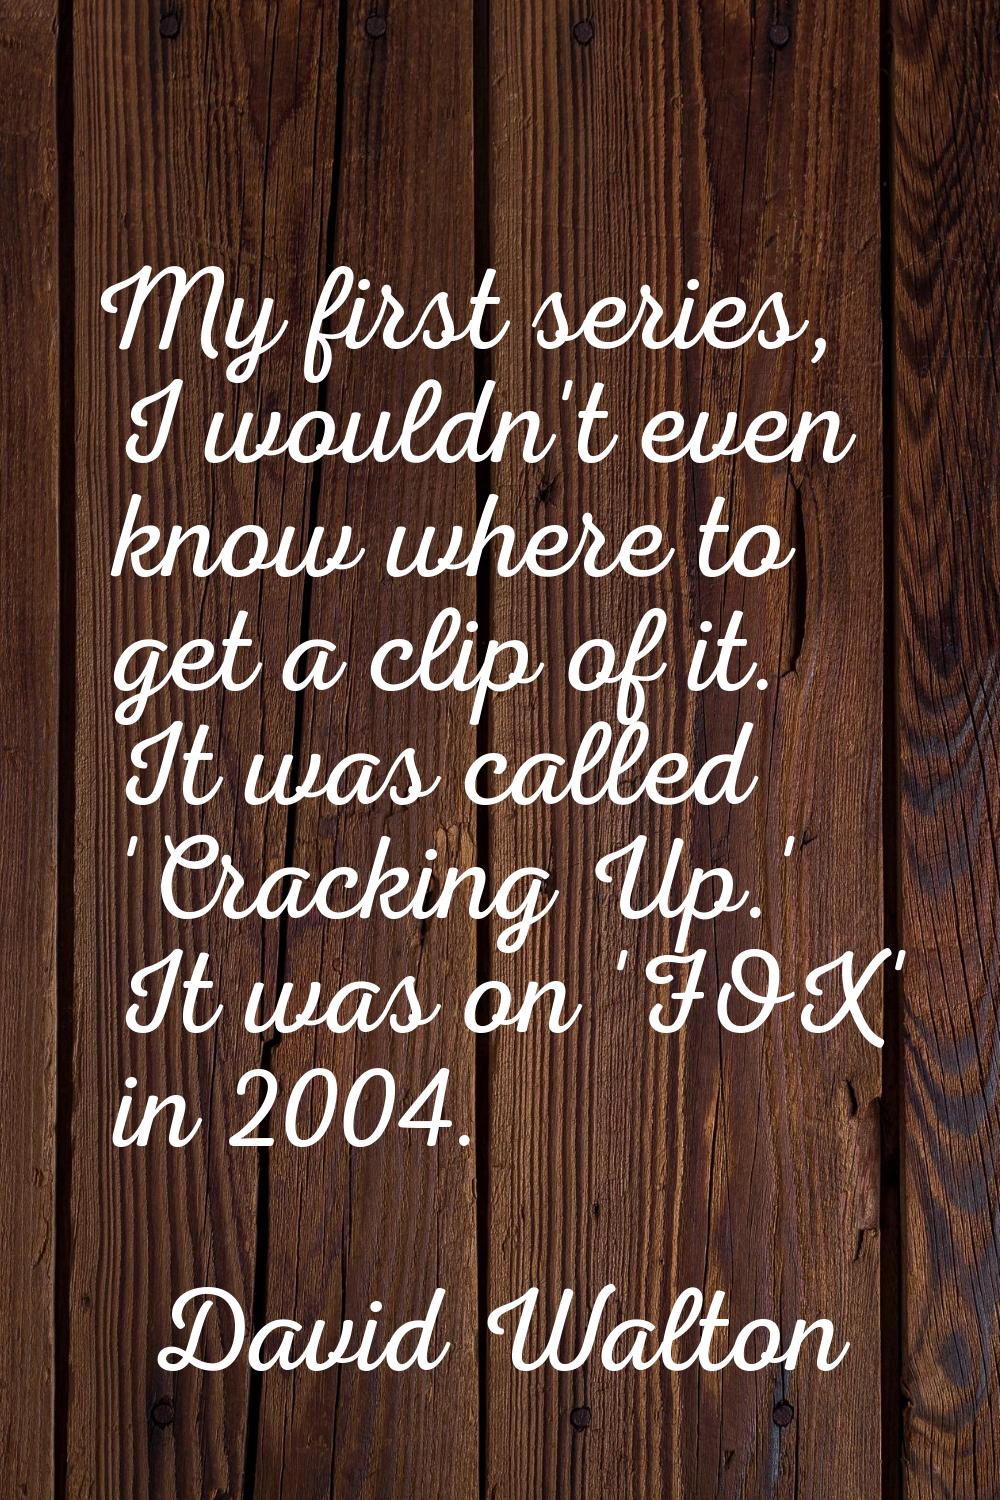 My first series, I wouldn't even know where to get a clip of it. It was called 'Cracking Up.' It wa